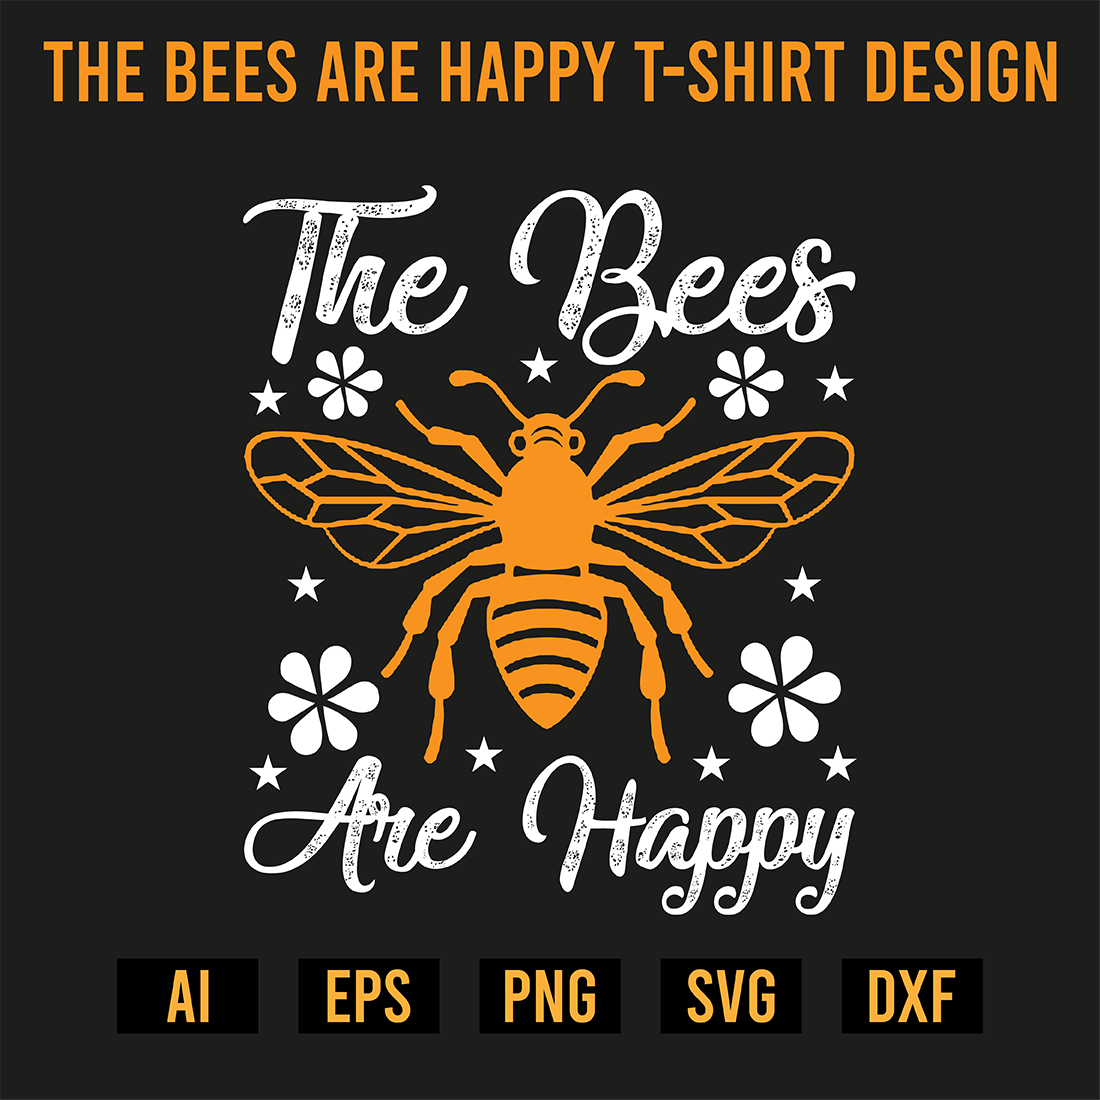 The Bees Are Happy T- Shirt Design cover image.